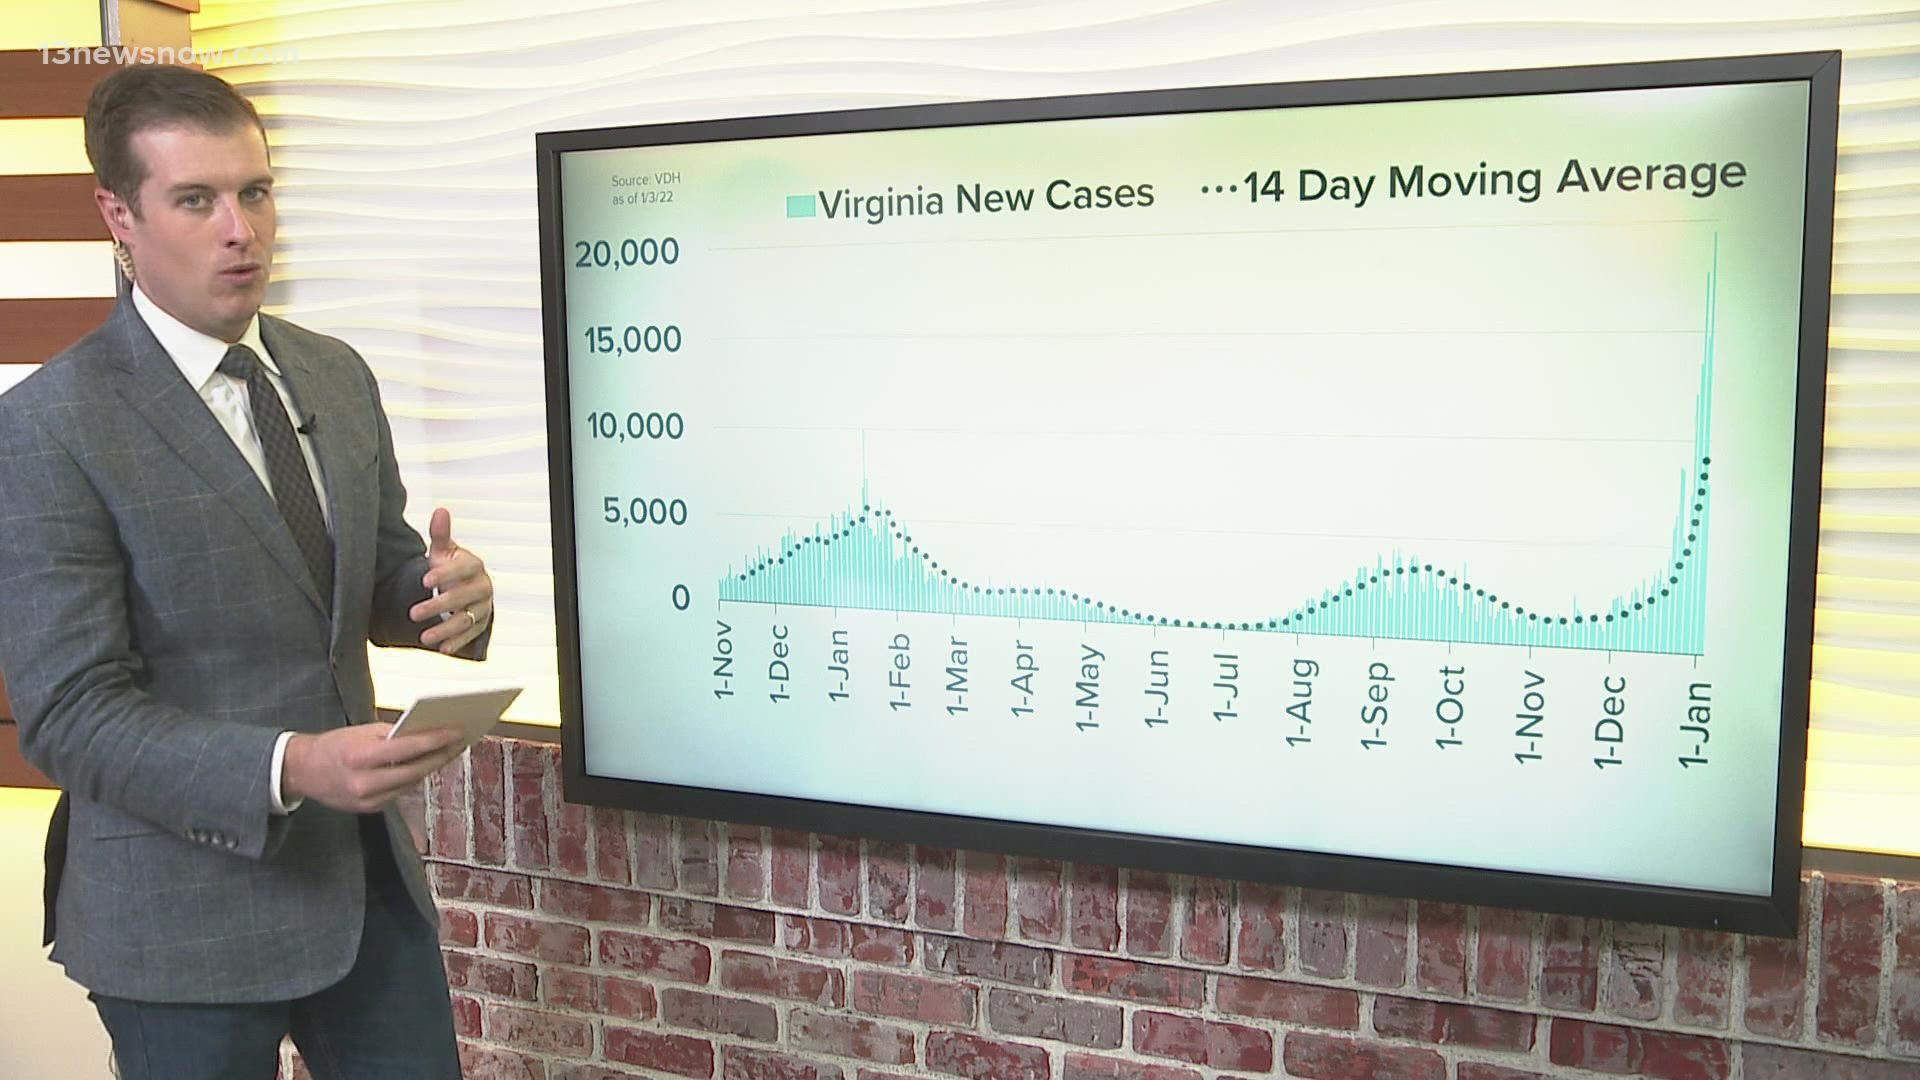 For the first reporting day of the new year, Virginia's health department added 7,967 new cases to its running count. Dan Kennedy has the latest.